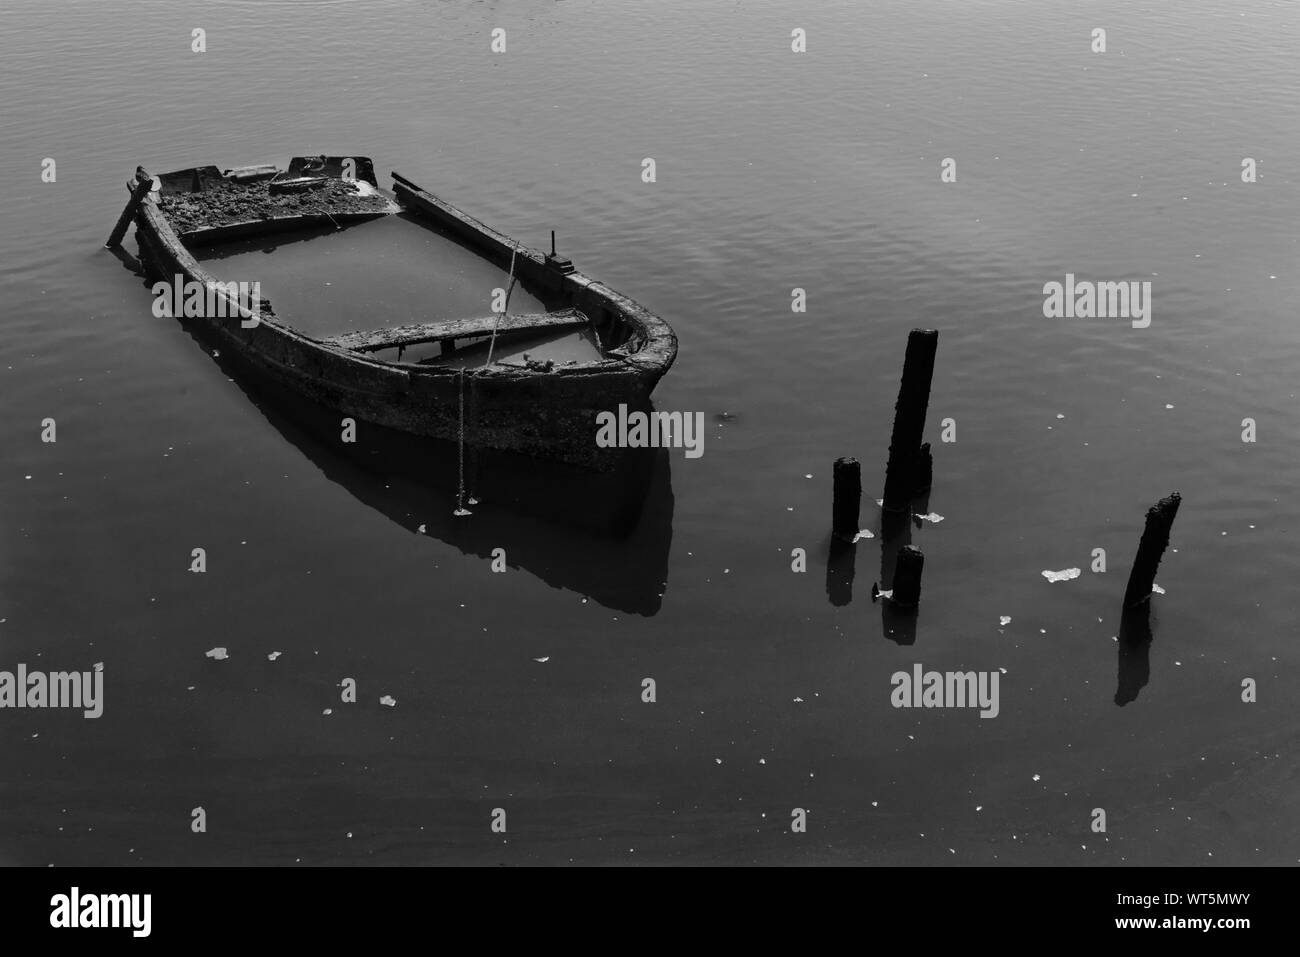 Sinking boat Black and White Stock Photos & Images - Alamy